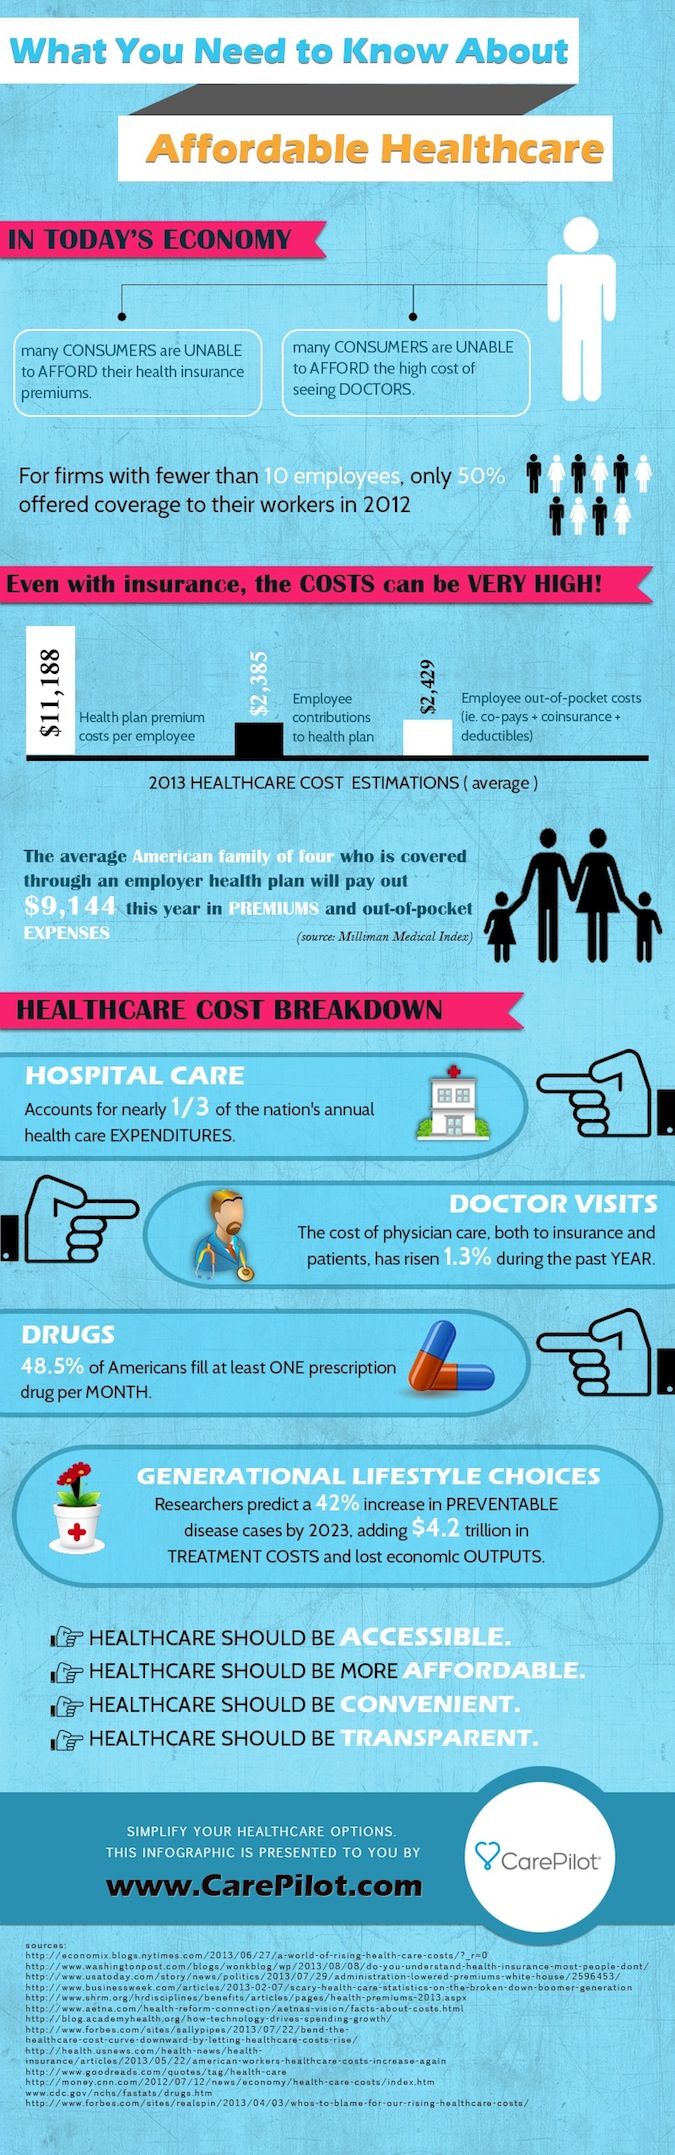 Healthcare infographic : www.carepilot.com... What You Need To Know ...